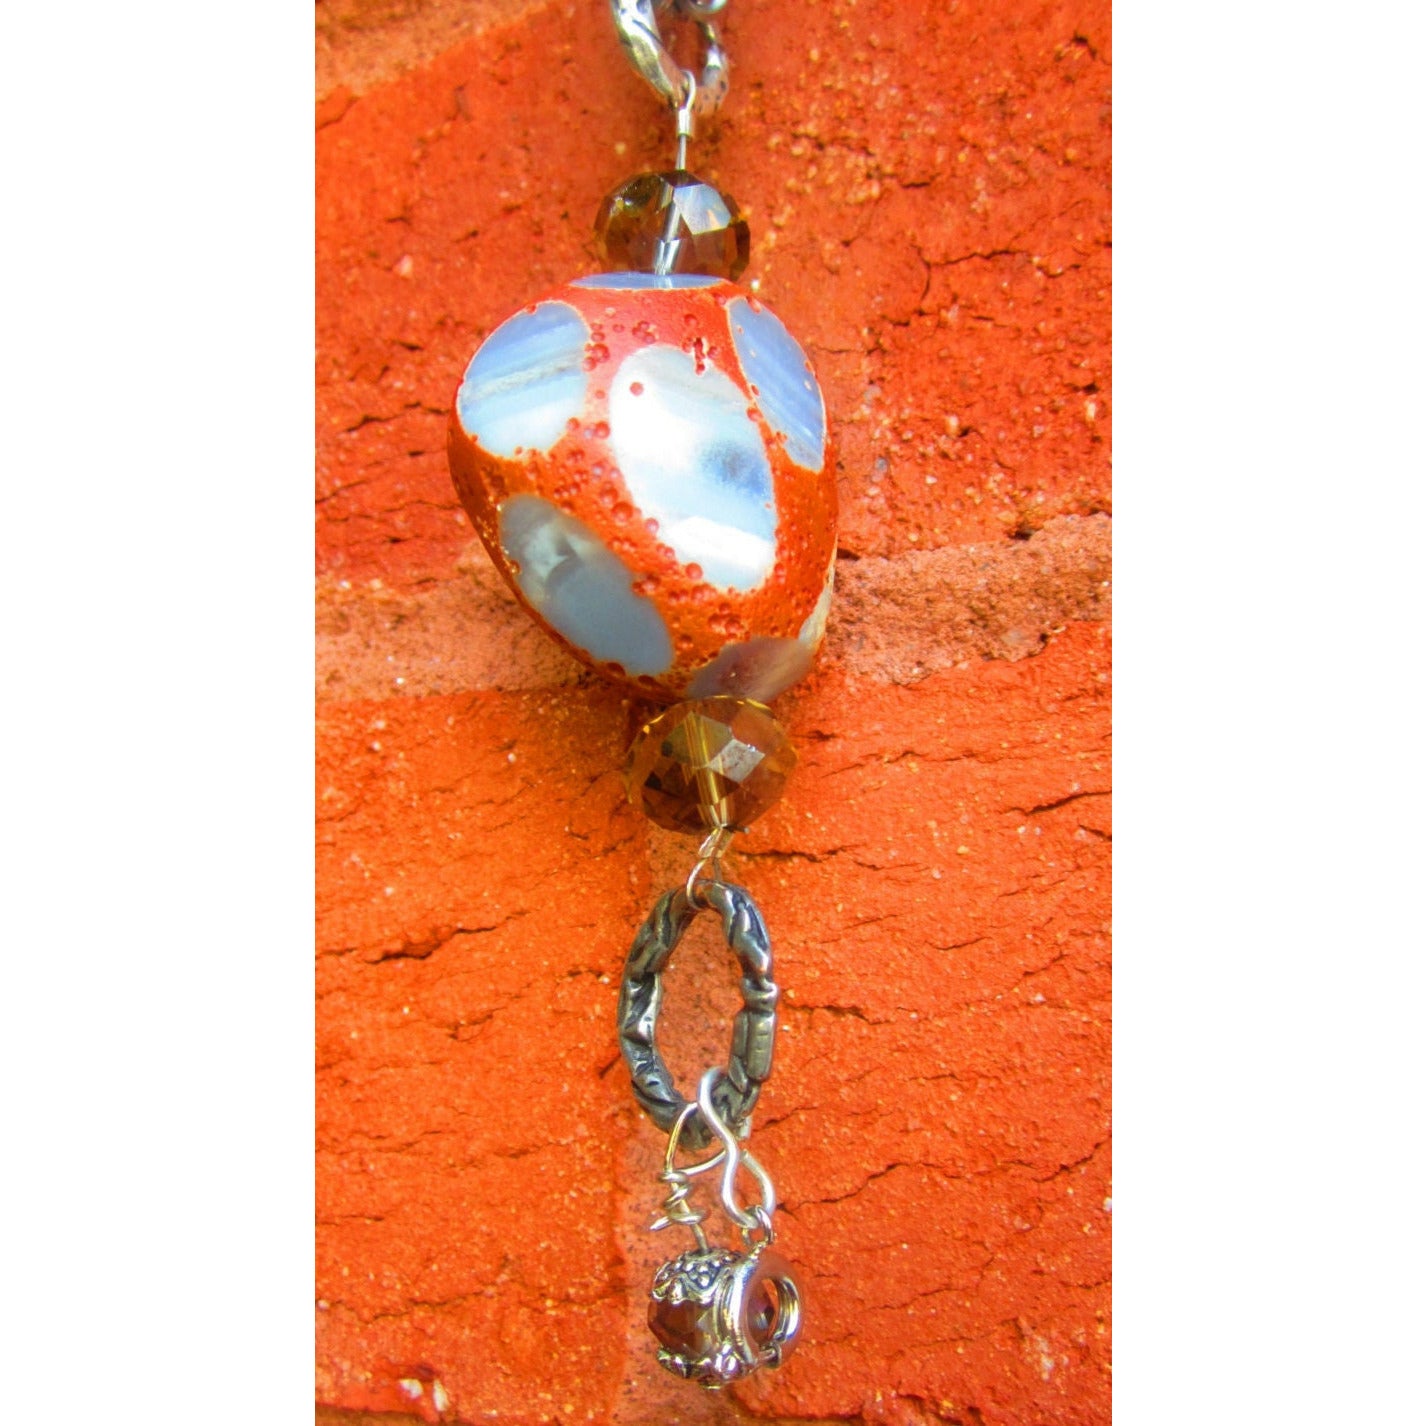 Polished and Rough Orange Agate Charm Necklace